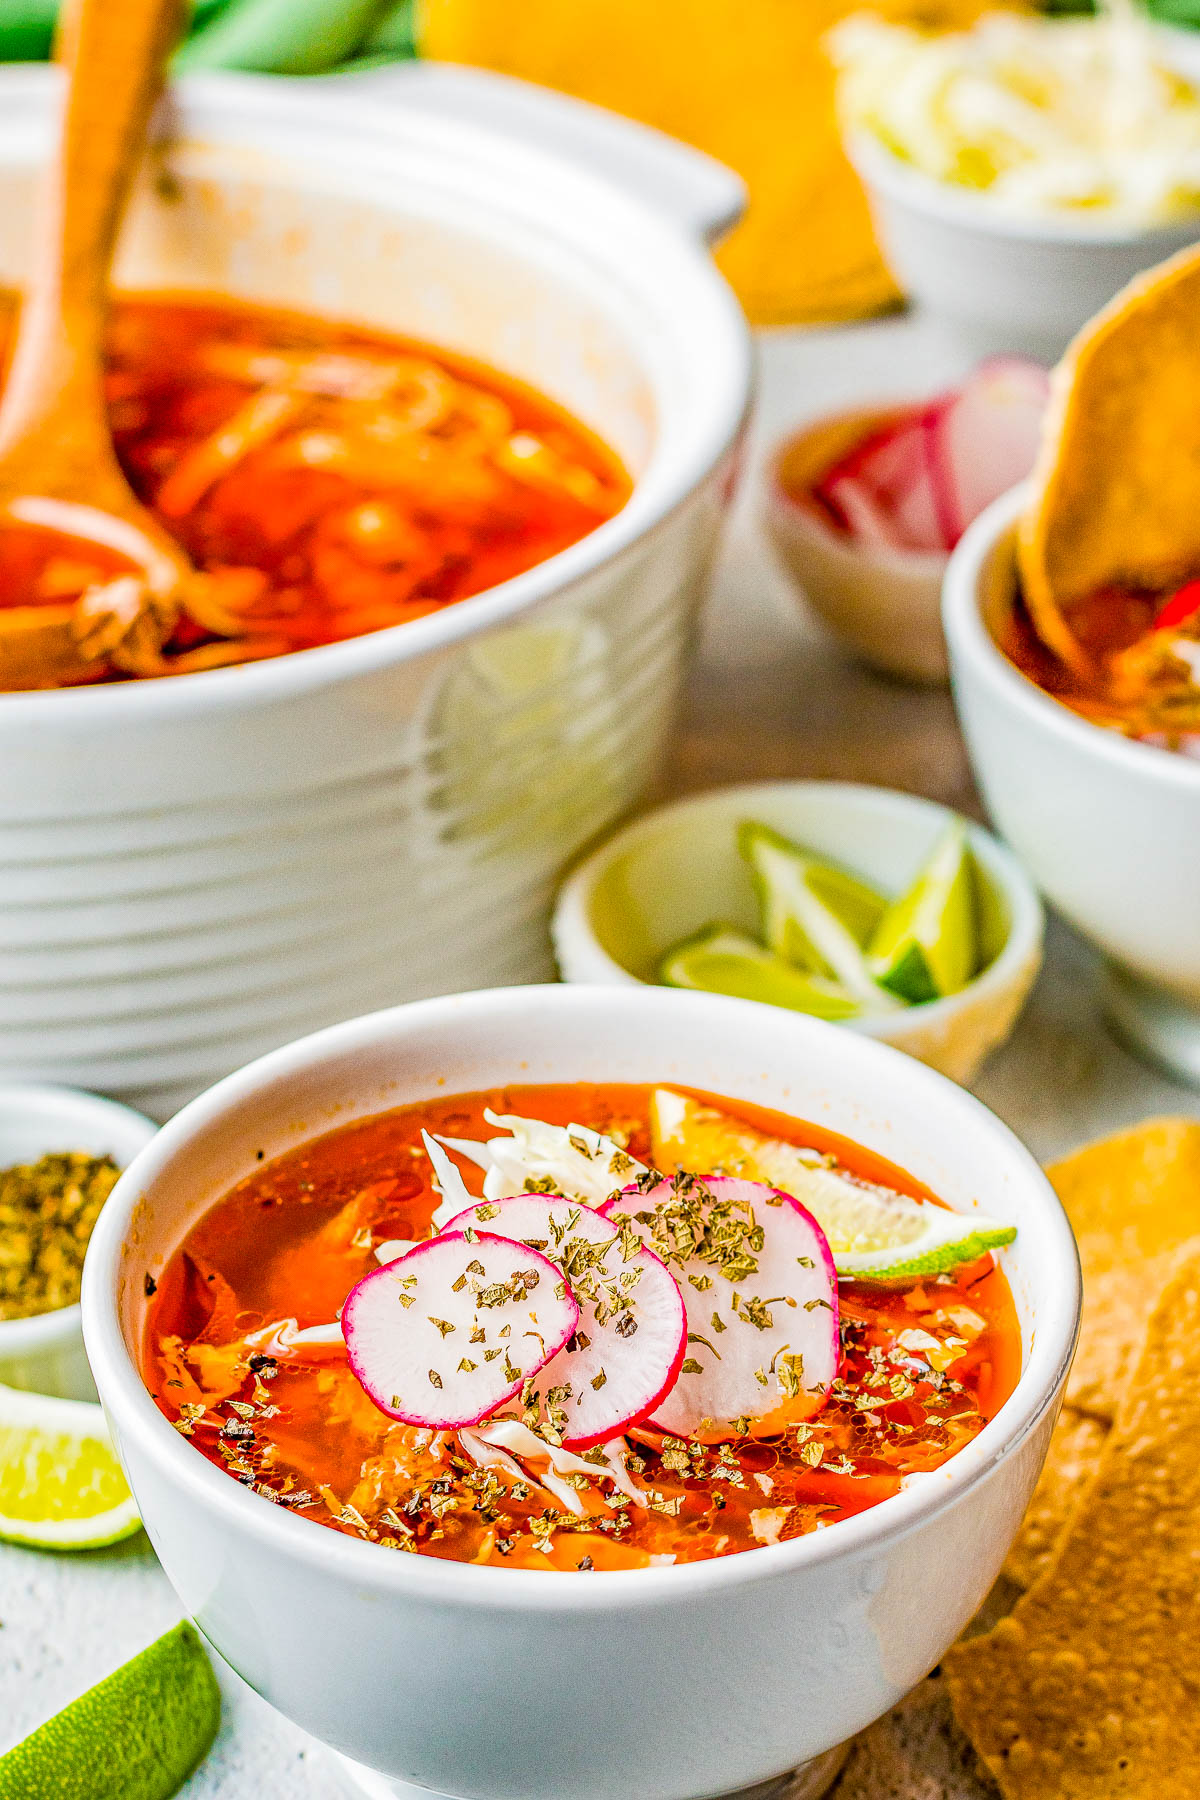 Pozole Rojo - This traditional Mexican soup features tender shredded pork, hominy, and more in a flavorful red chile broth! Learn how to make this authentic, rich and comforting, and very filling soup. It's perfect for chilly fall and winter nights! Easy to follow steps for either an INSTANT POT, SLOW COOKER, or STOVETOP! 